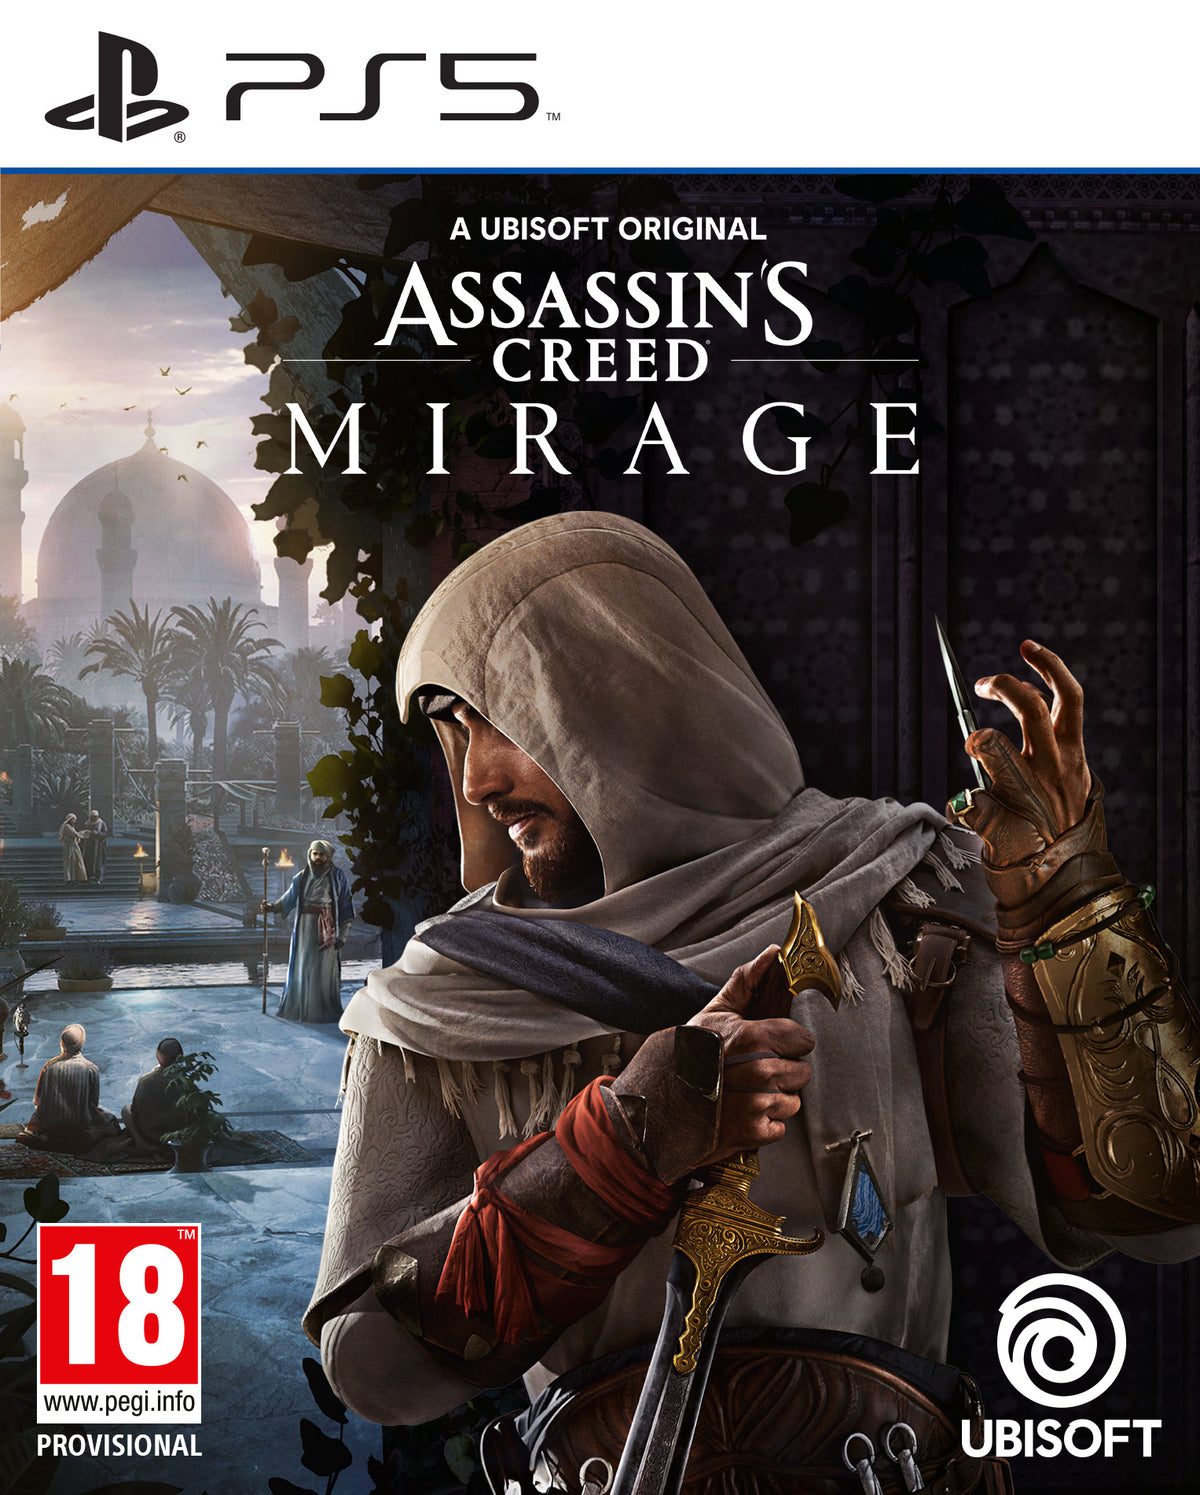 PS5 Assassins Creed Mirage - Albagame